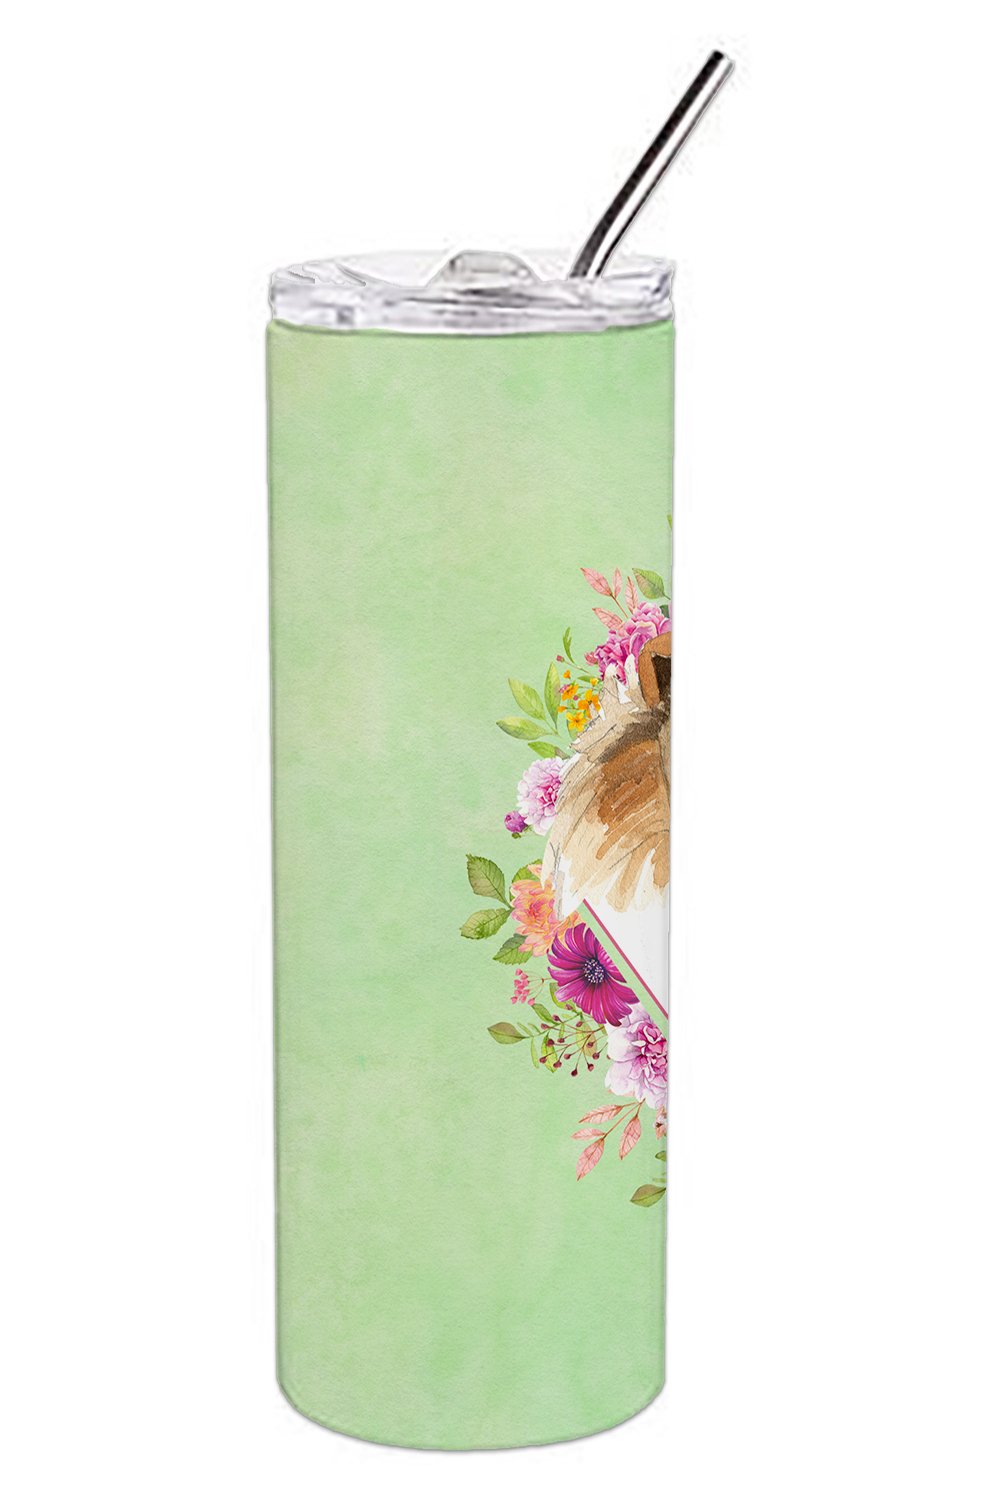 Collie Green Flowers Double Walled Stainless Steel 20 oz Skinny Tumbler CK4376TBL20 by Caroline's Treasures